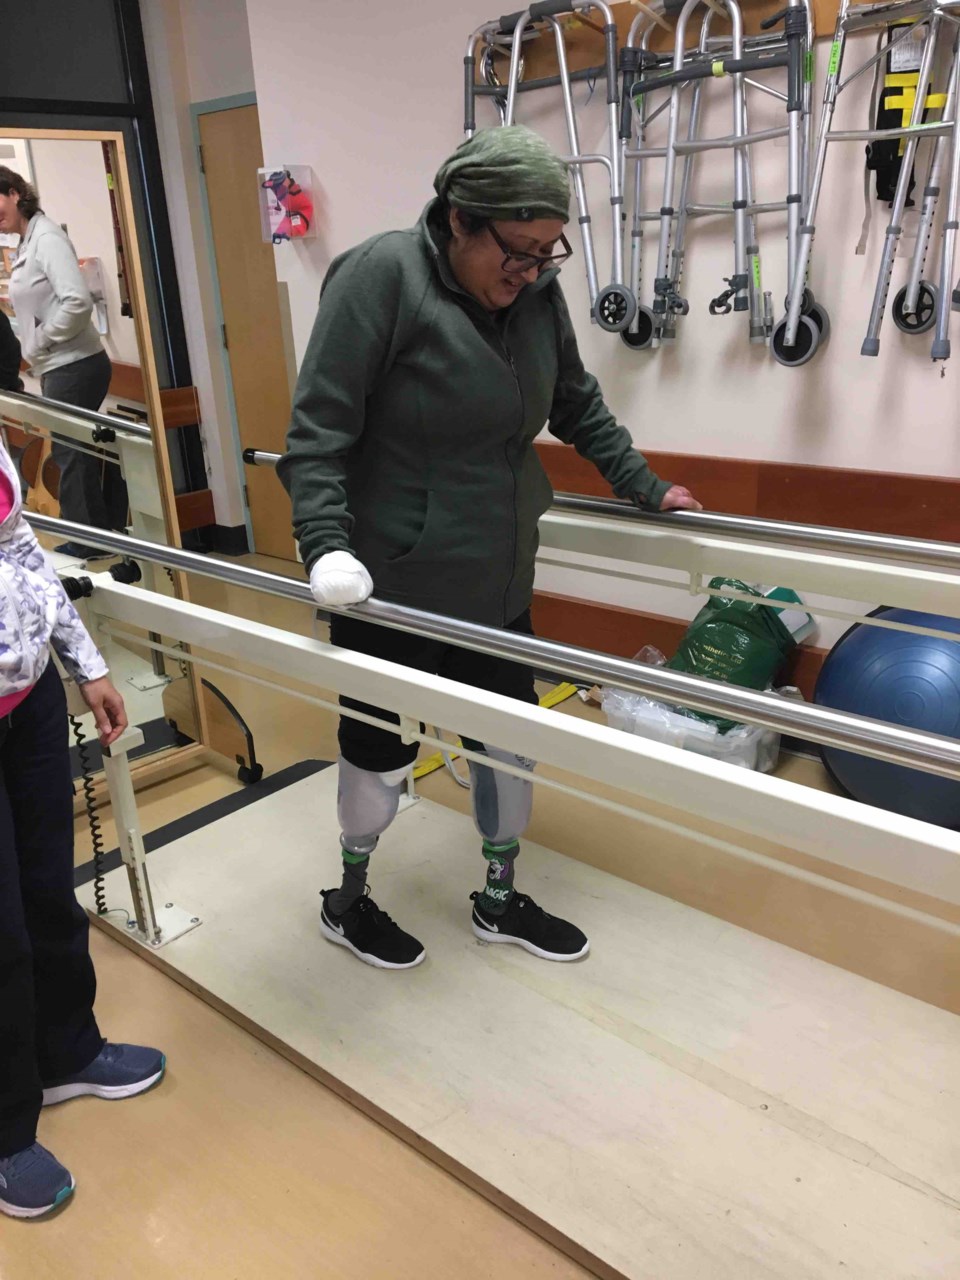 Long has had to learn to walk again, something she likens to walking on stilts.